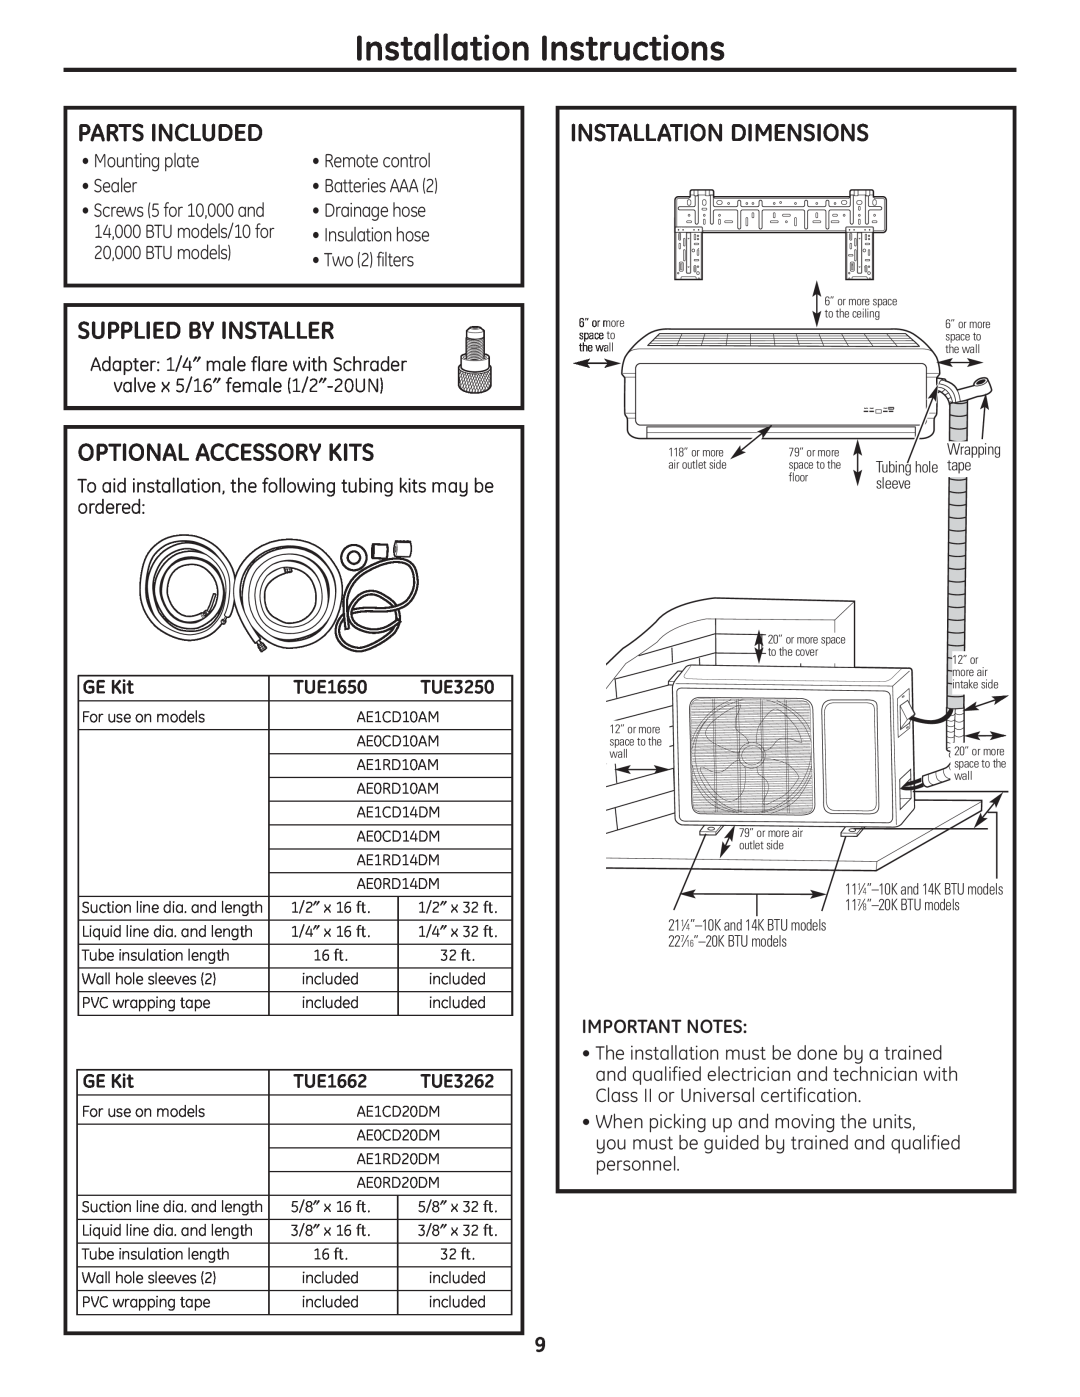 GE AE0RD10AM Installation Instructions, Parts Included, Installation Dimensions, Supplied By Installer, GE Kit, TUE1650 